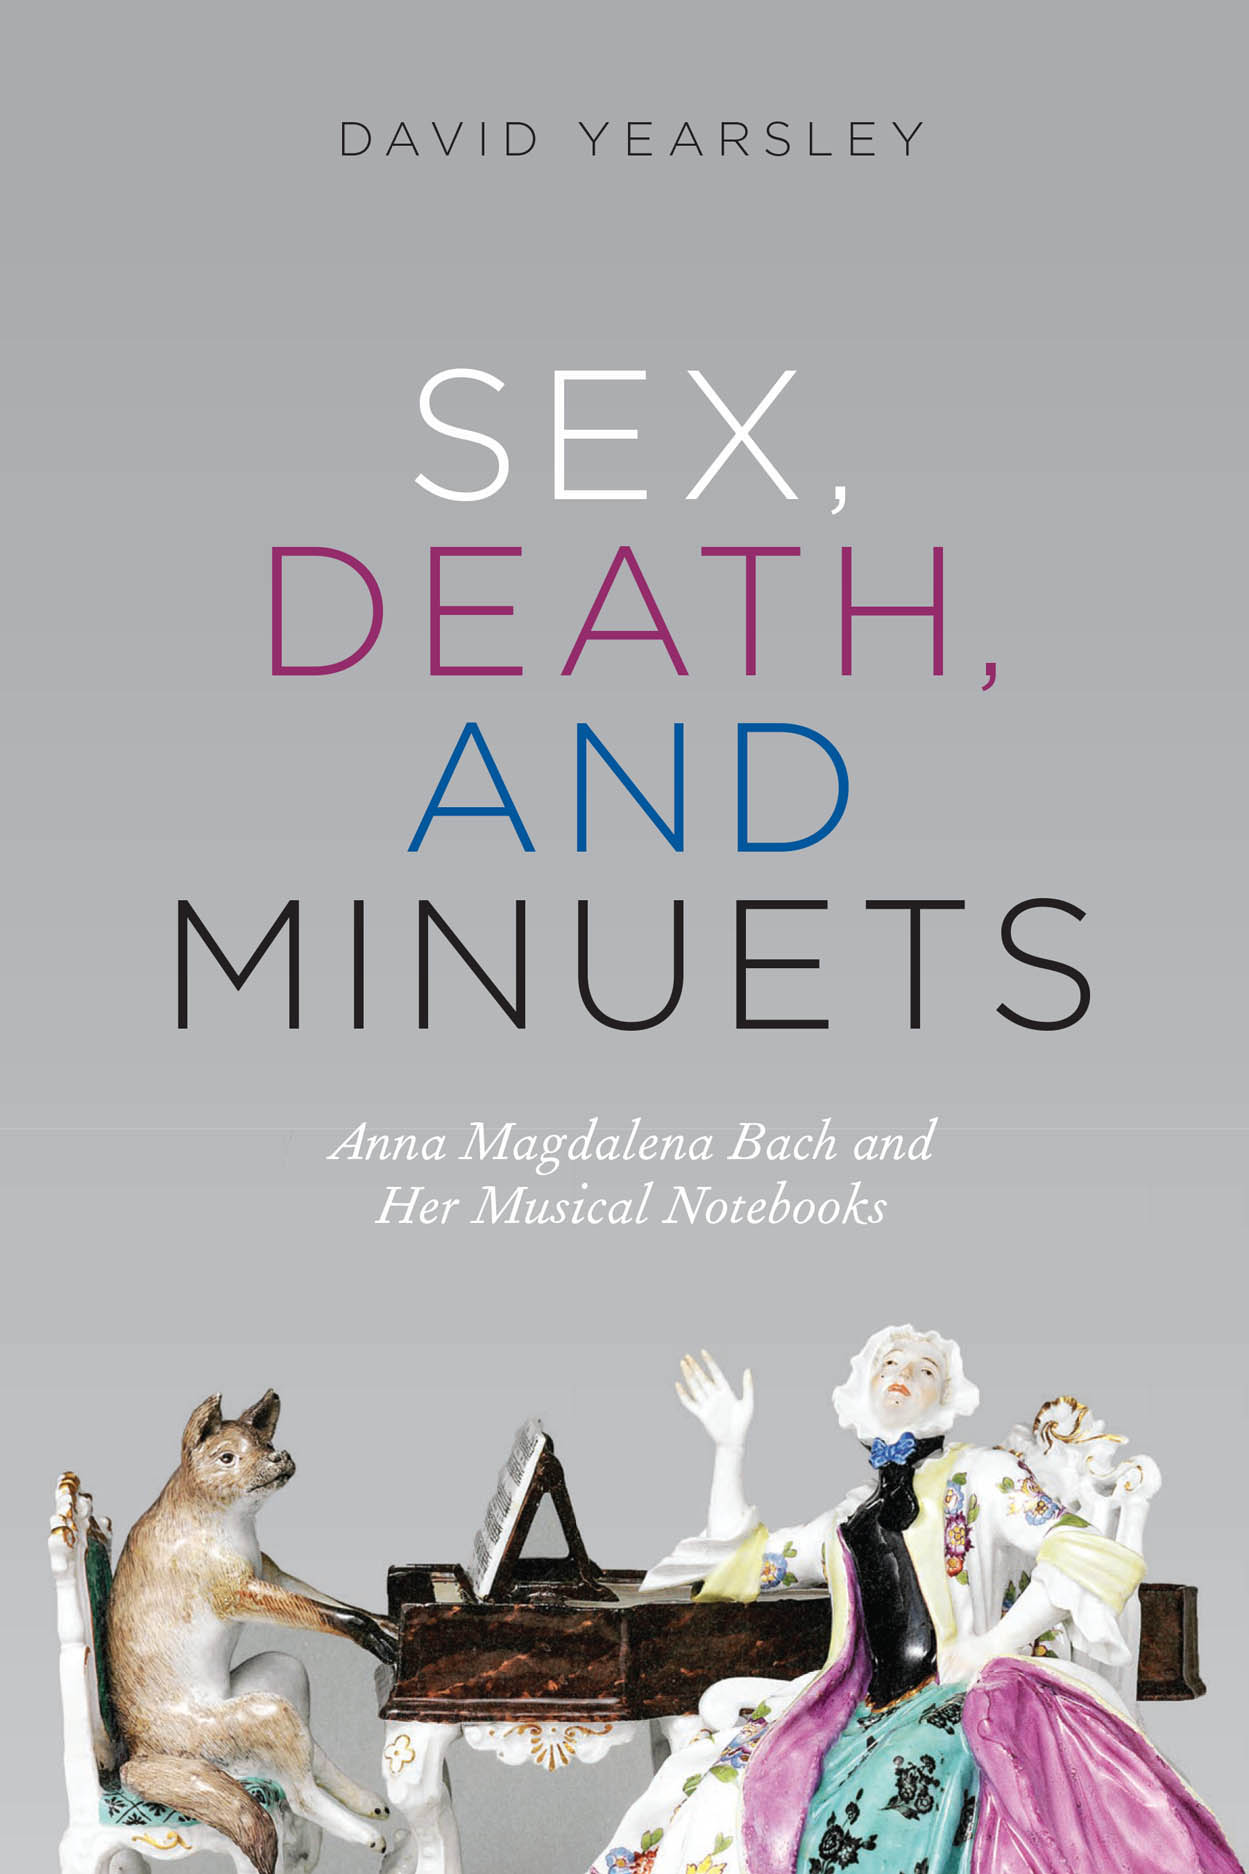 Sex, Death, and Minuets Anna Magdalena Bach and Her Musical Notebooks, Yearsley